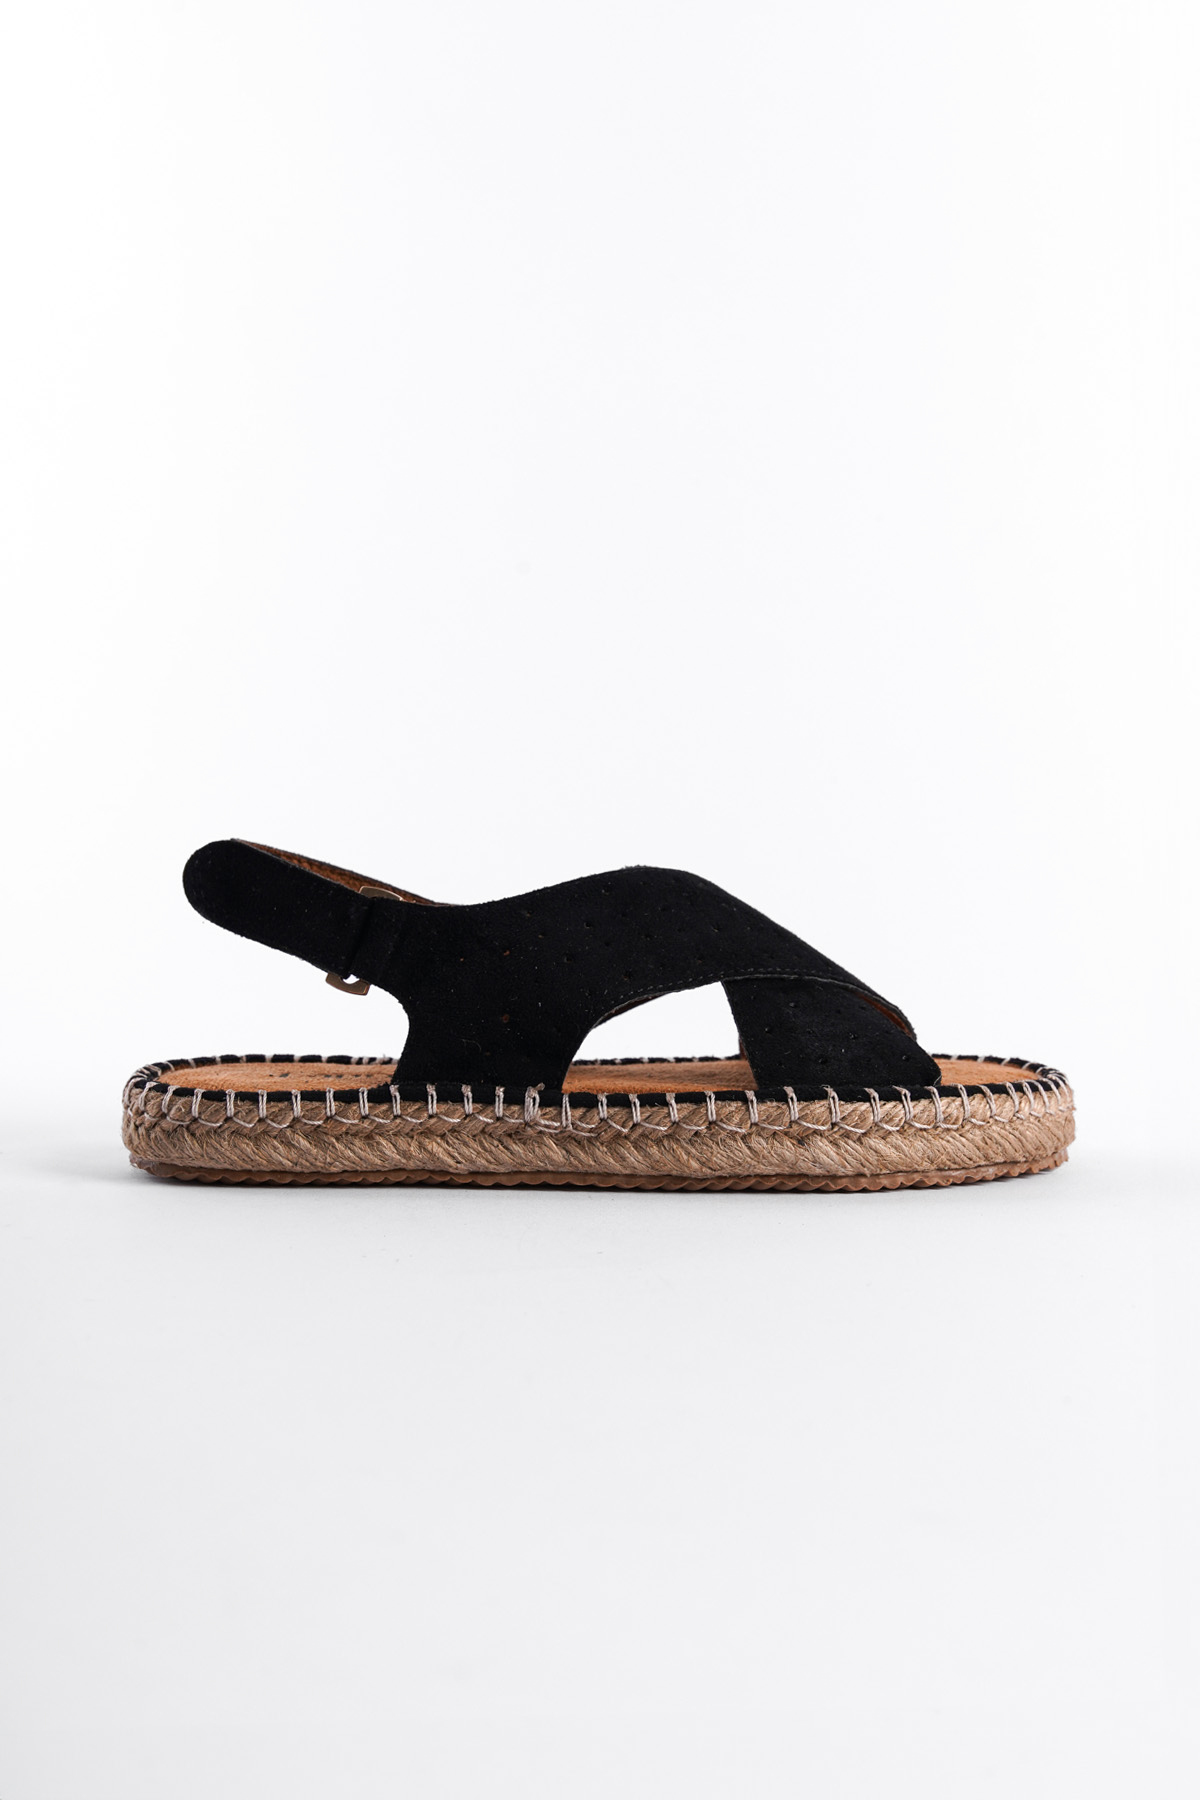 Capone Outfitters Women's Cross-Blade Espadrilles Sandals